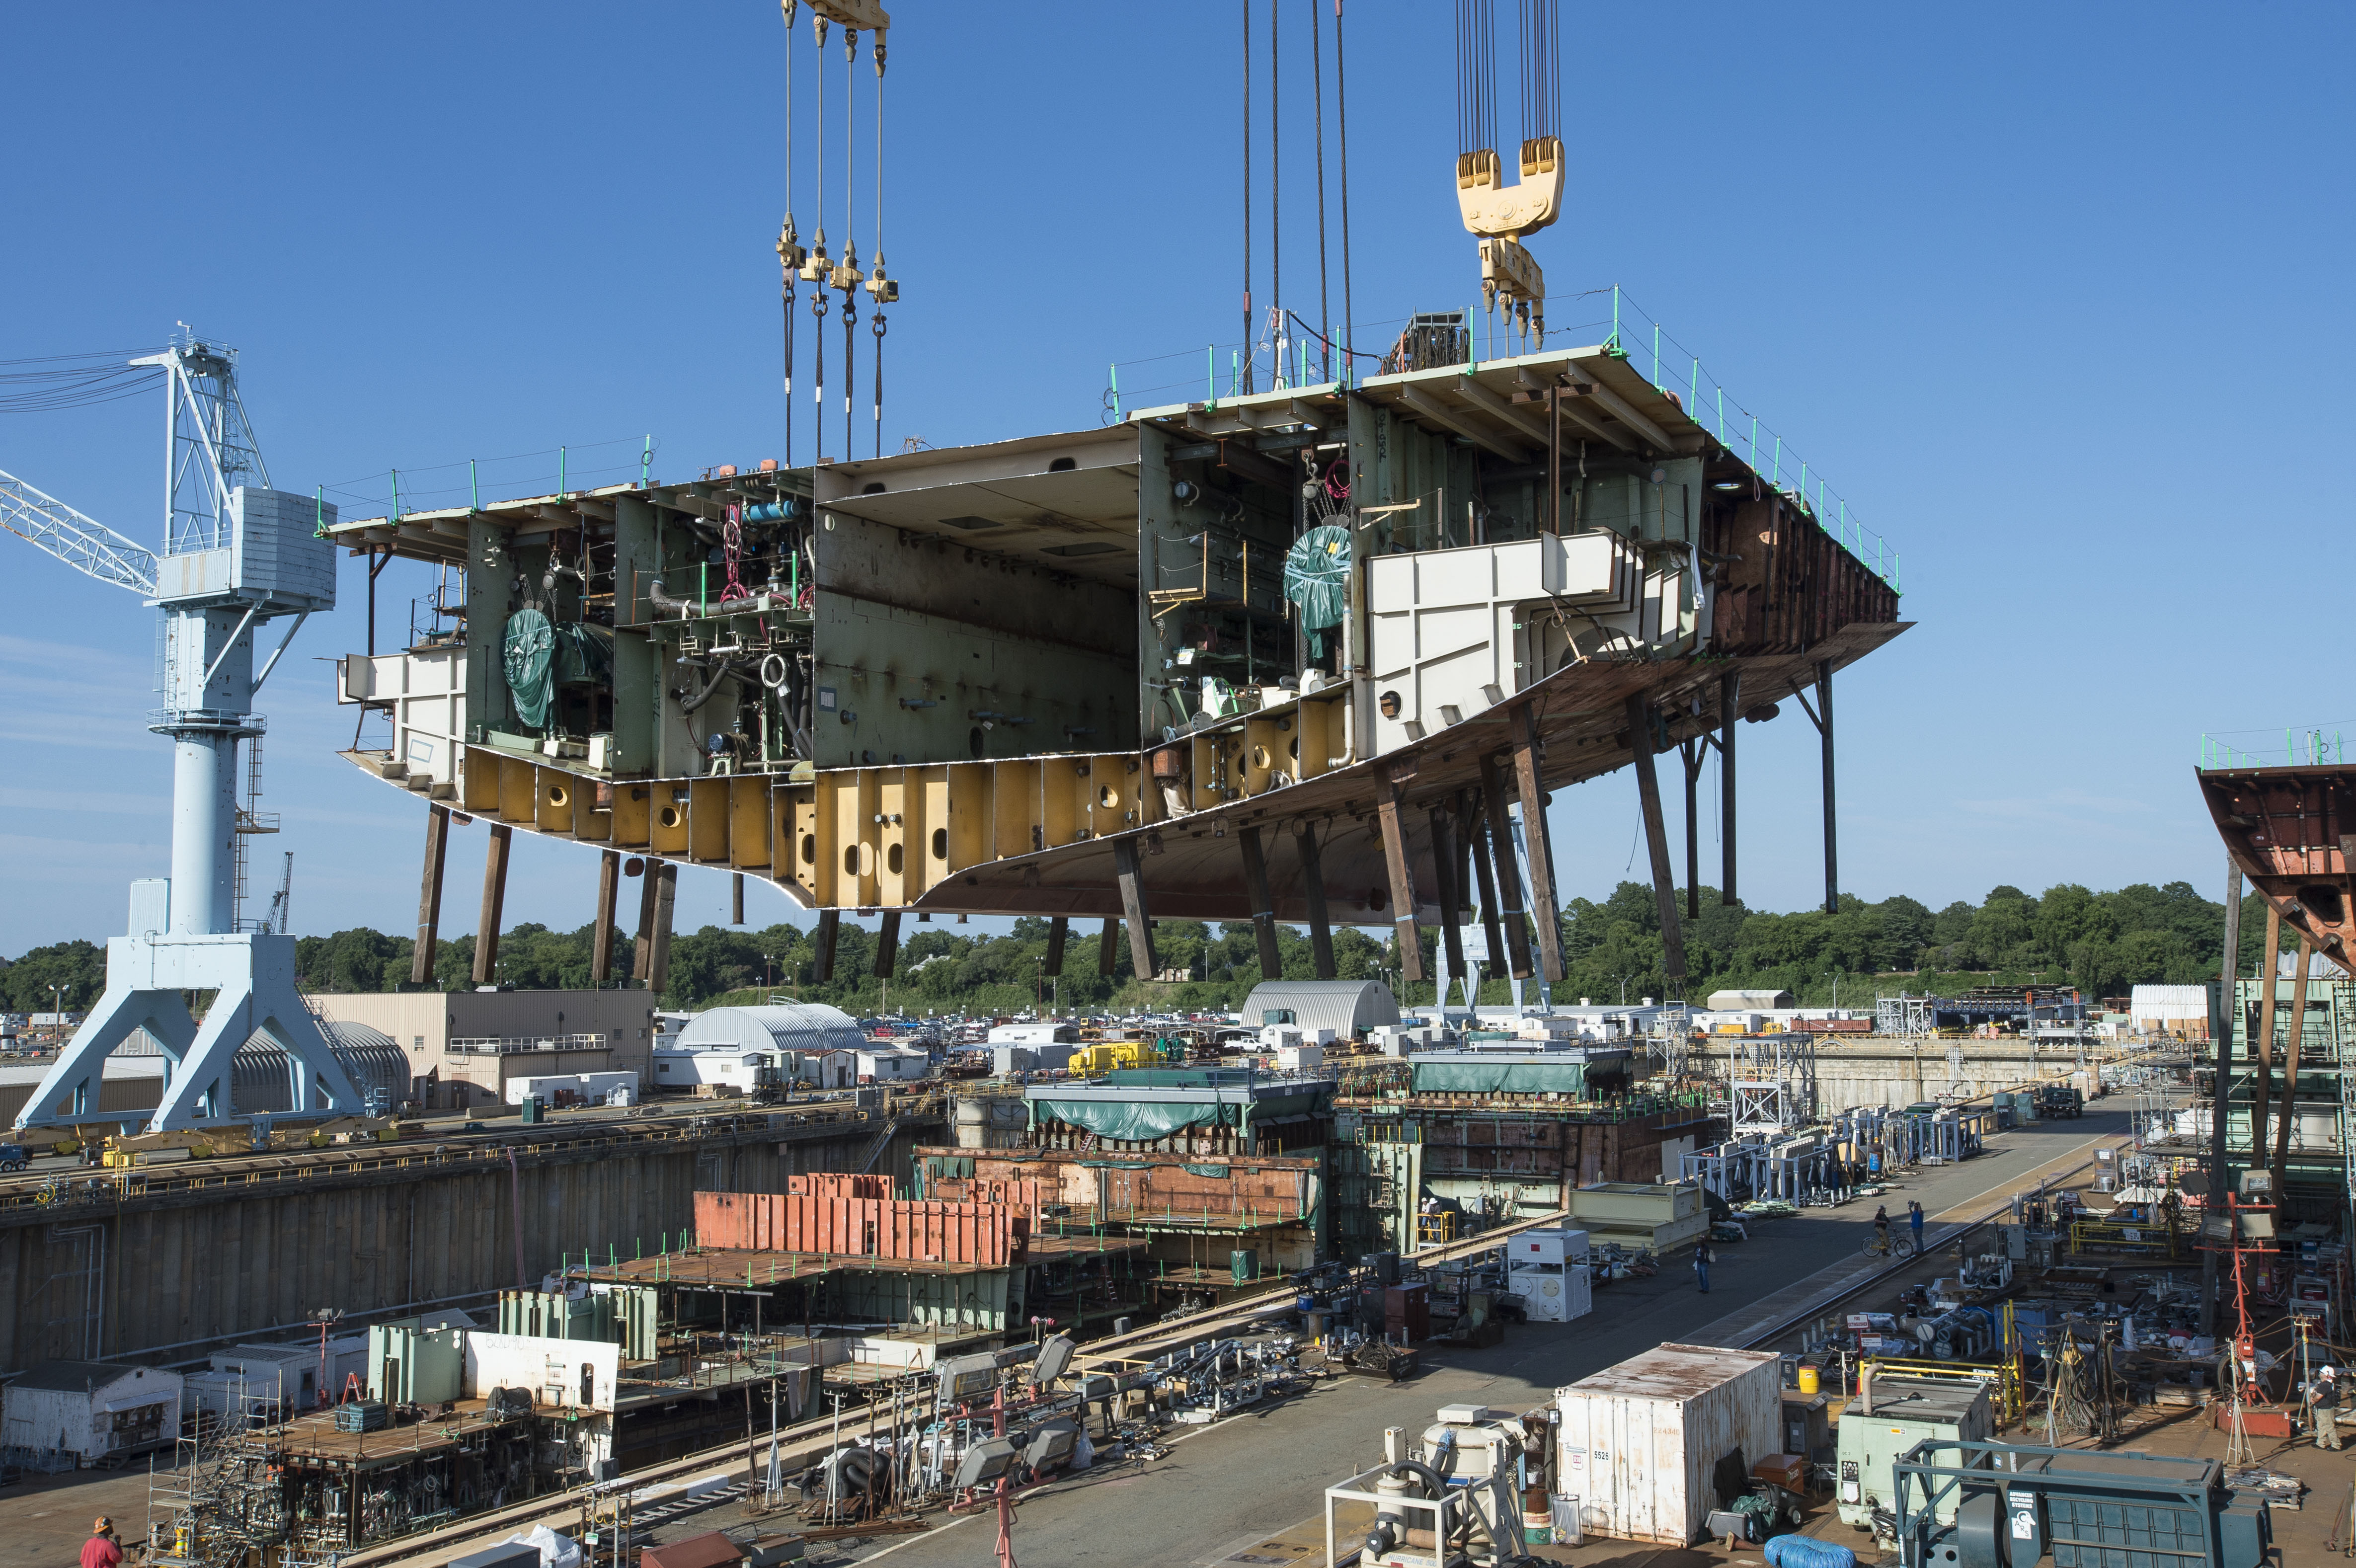 Newport News Shipbuilding placed a 900-ton superlift into dry dock, continuing construction of the nuclear-powered aircraft carrier John F. Kennedy (CVN 79). Nearly 90 lifts have been placed in the dock and joined together since the ship’s keel was laid in August 2015. Newport News Shipbuilding photo.